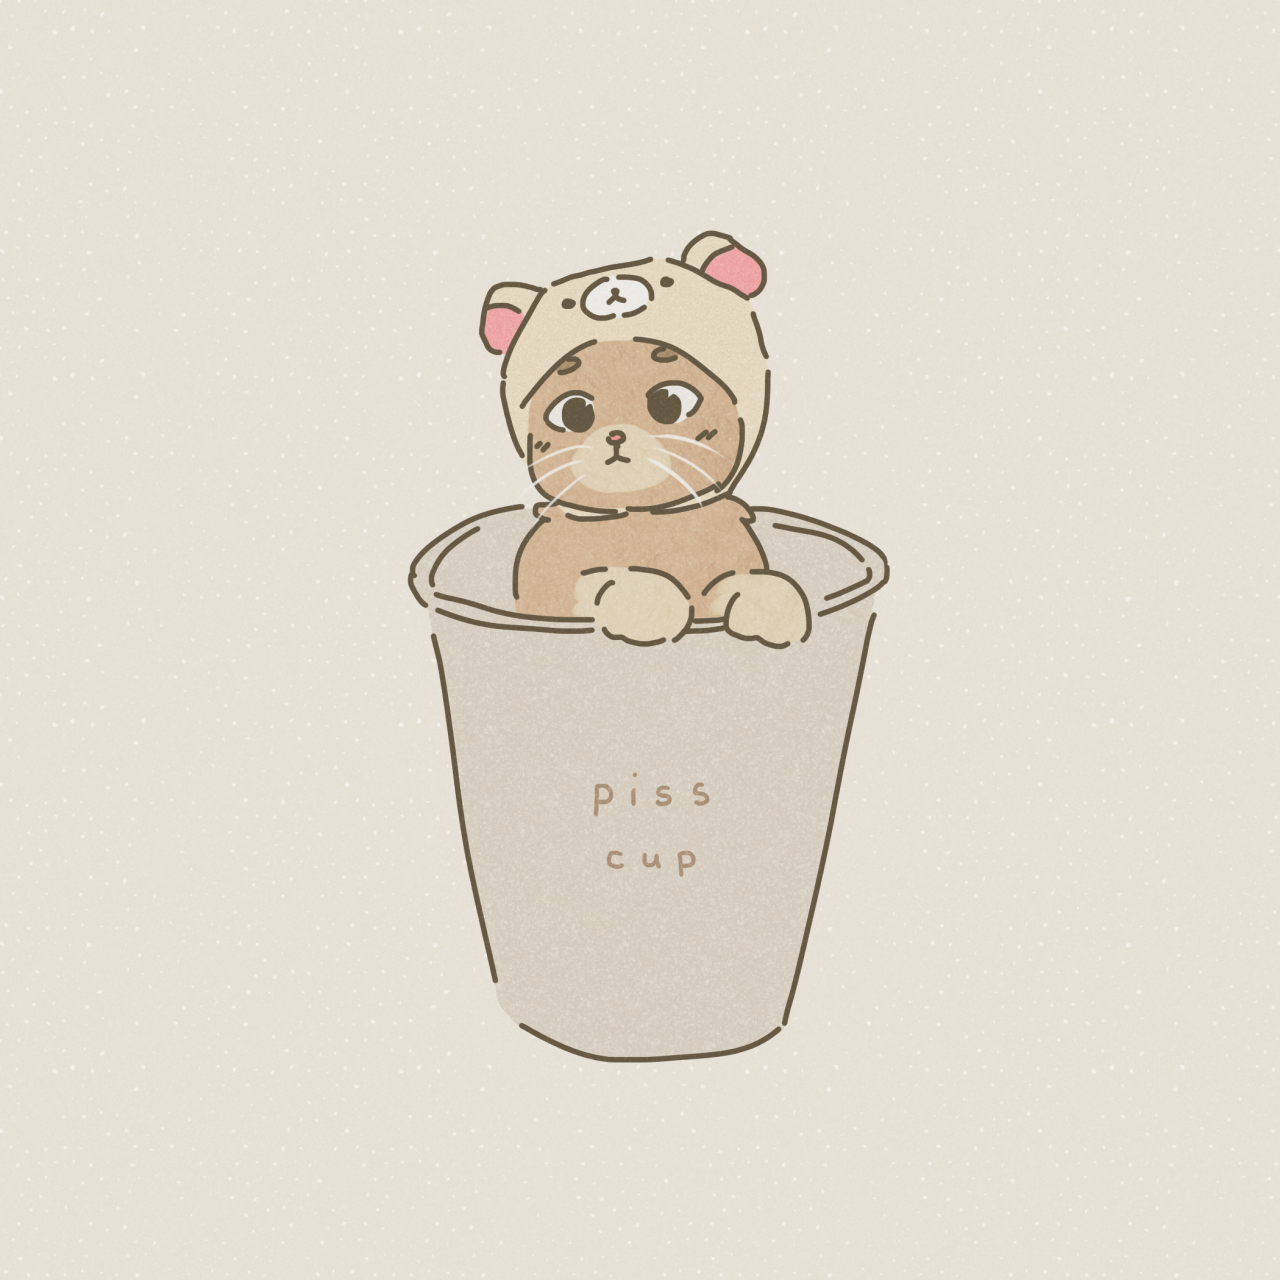 piss cup 🤔 get it as a sticker here 🐈 | on ig here
 

hiii tumblr! i started this blog last year but never posted my art. now, 